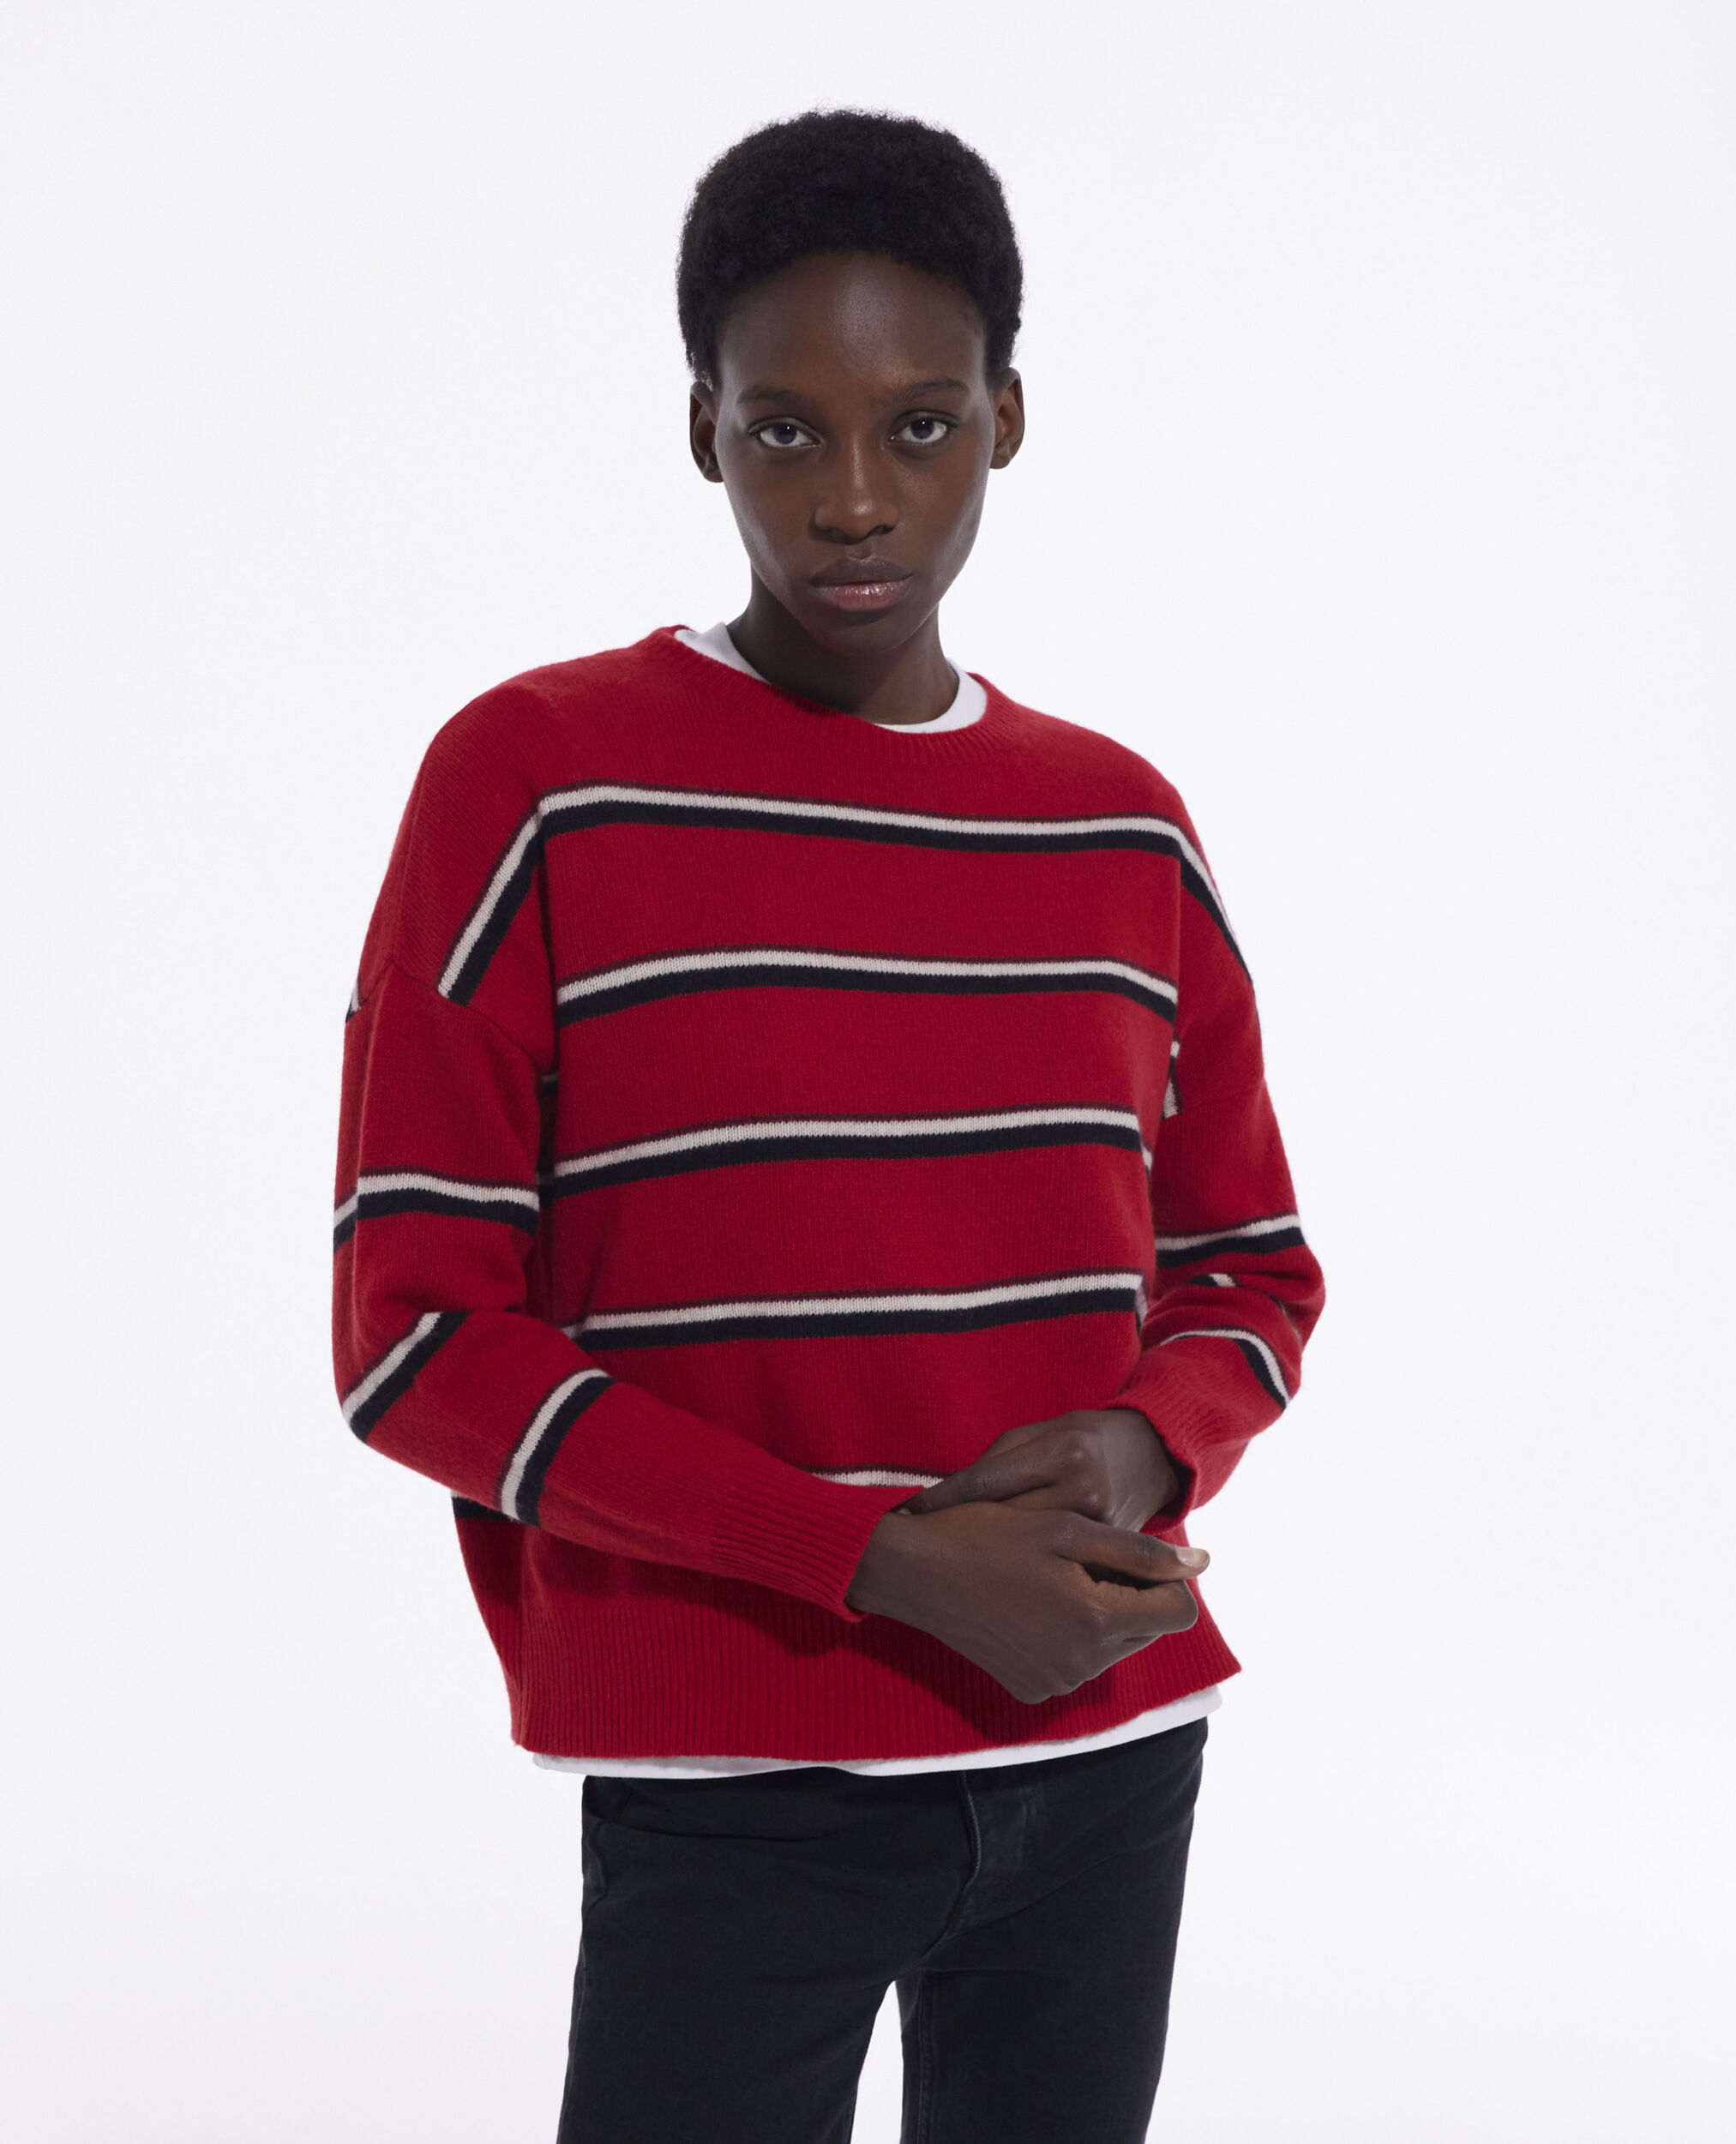 Pullover aus Kaschmir in Rot, RED-BLACK-WHITE, hi-res image number null